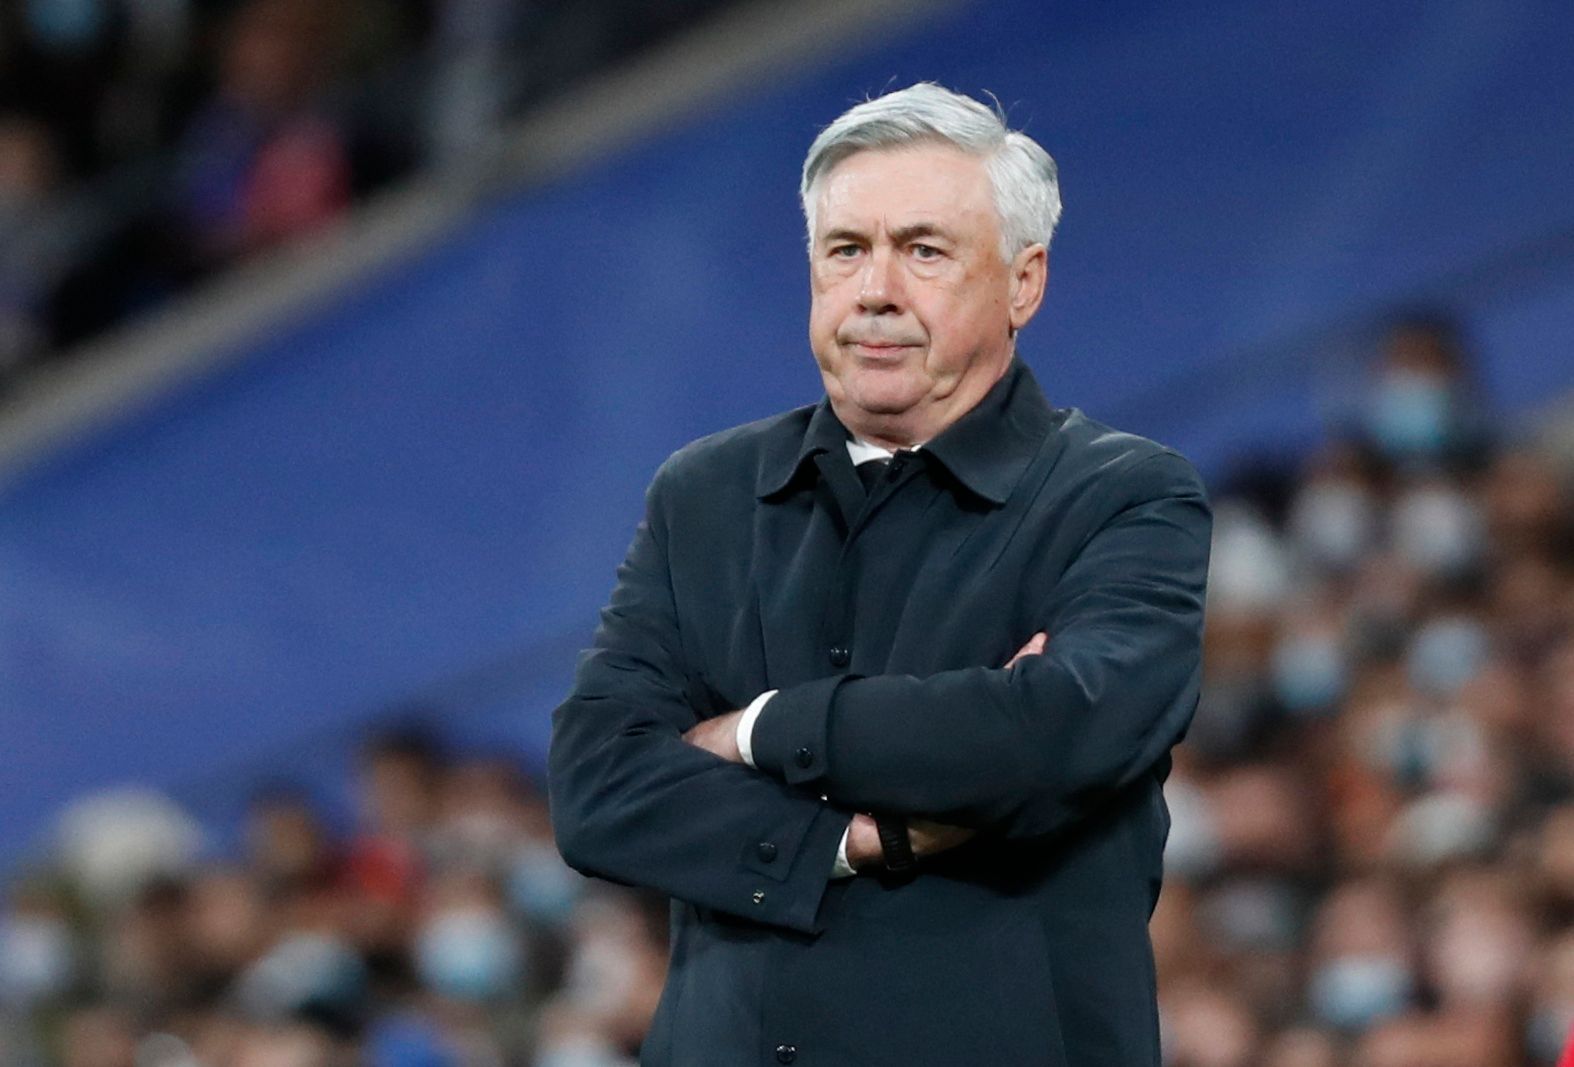 Premier League, Carlo Ancelotti, Manchester United, MUFC news, MUFC update, MUFC latest, MUFC manager rumours, Man United, Man Utd, Old Trafford